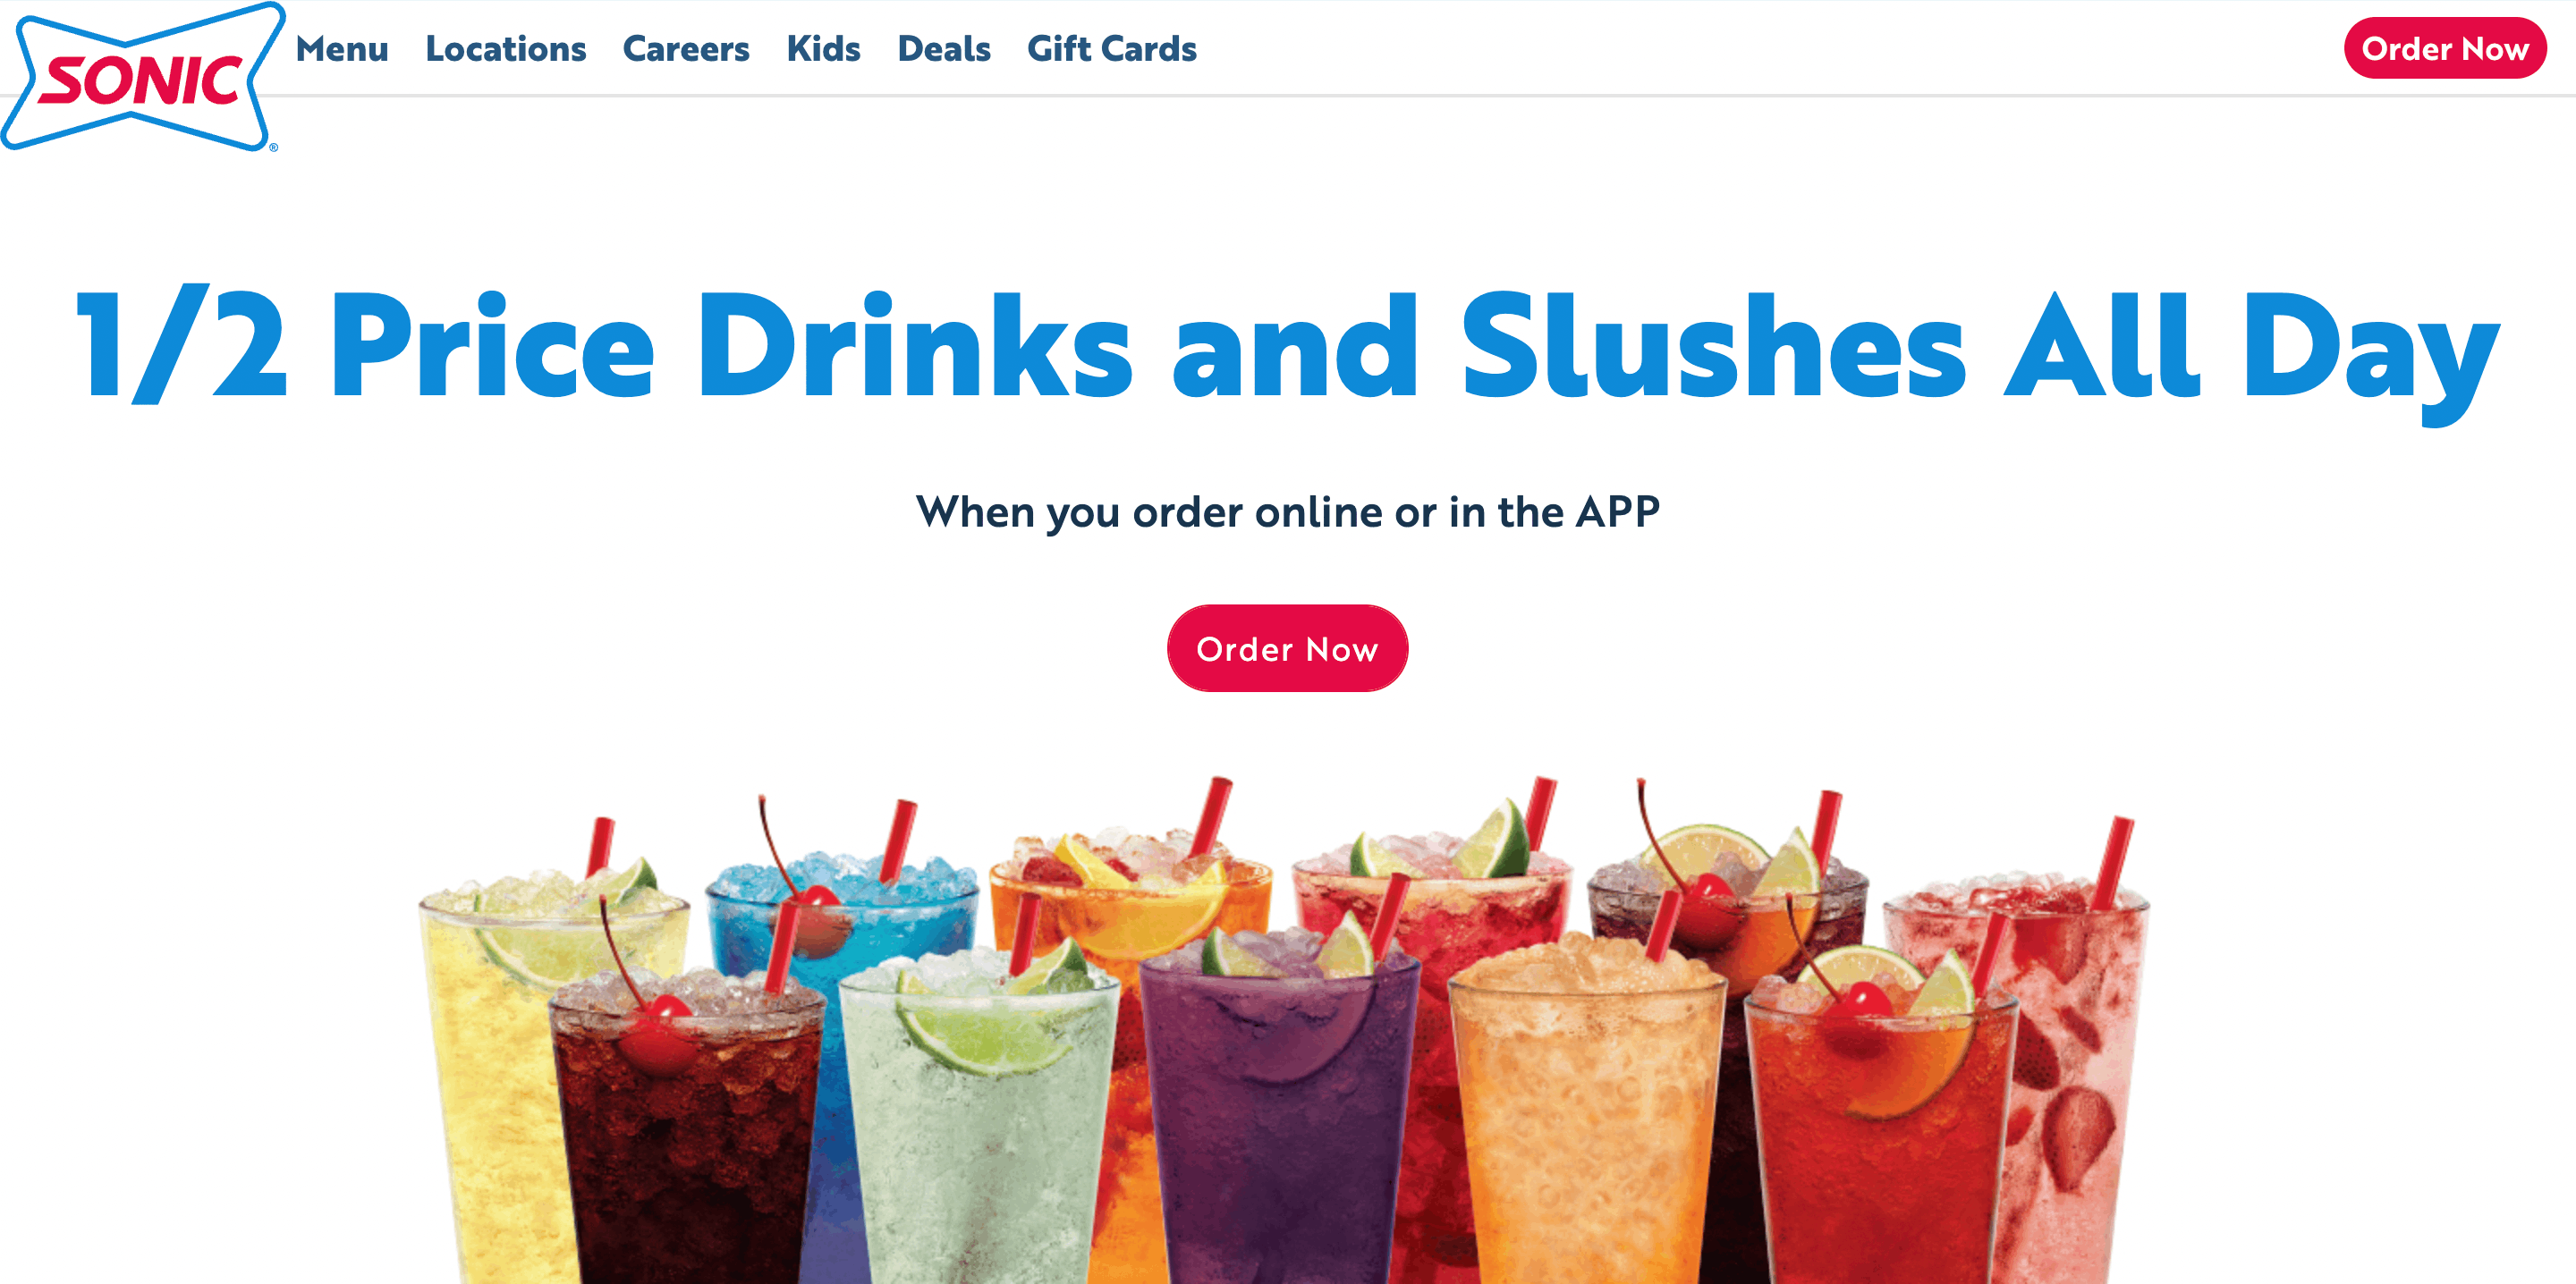 Sonic's Web View and Mobile Order-ahead